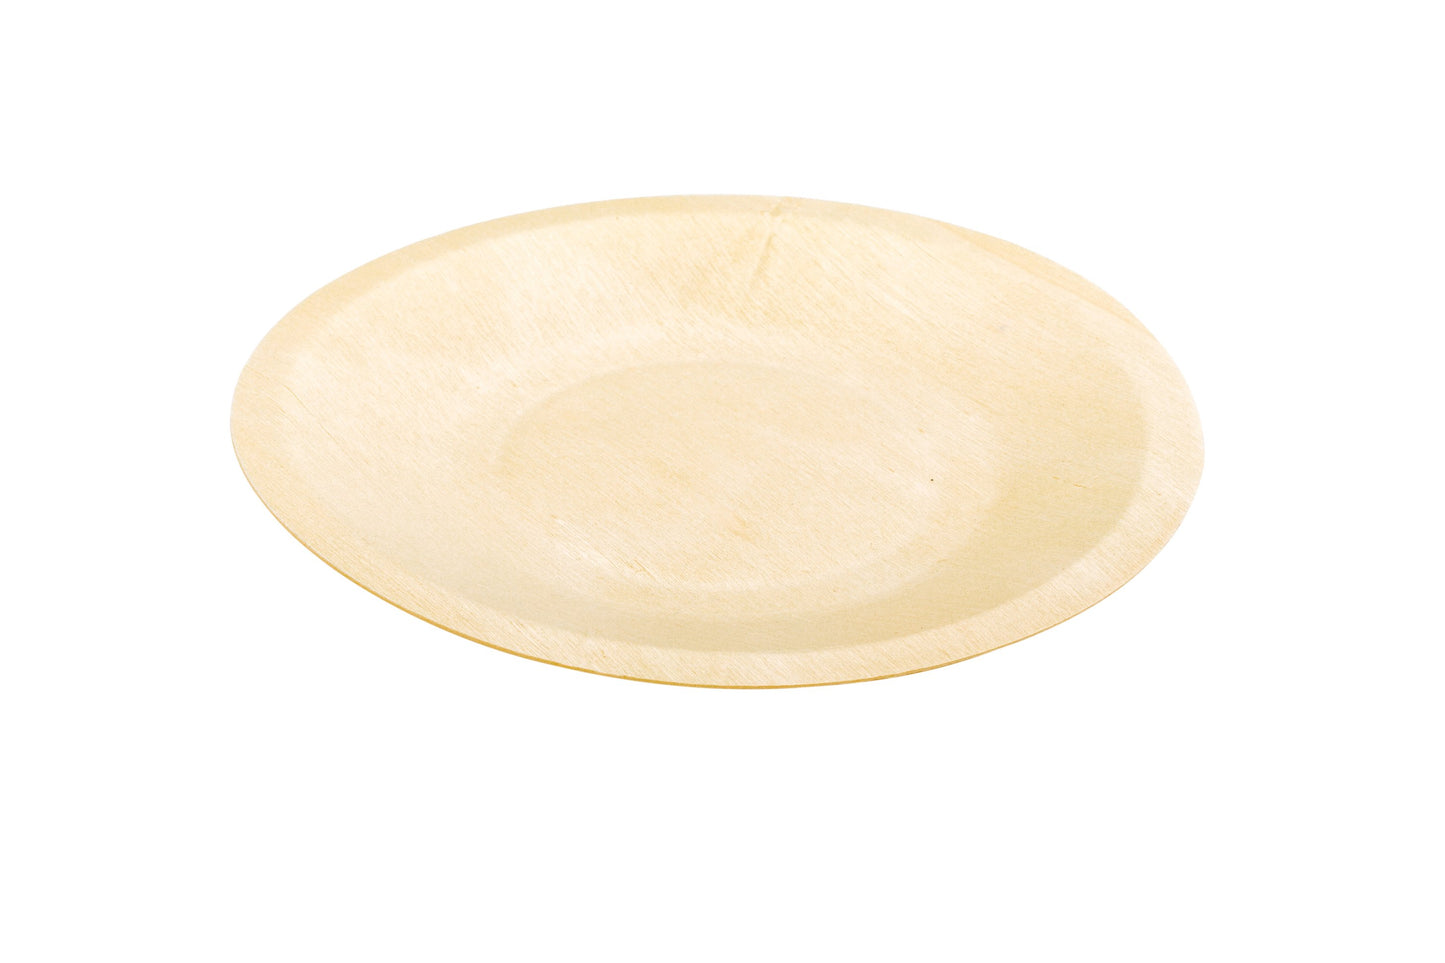 Wood Round Plate 13.97 cm 200 count box